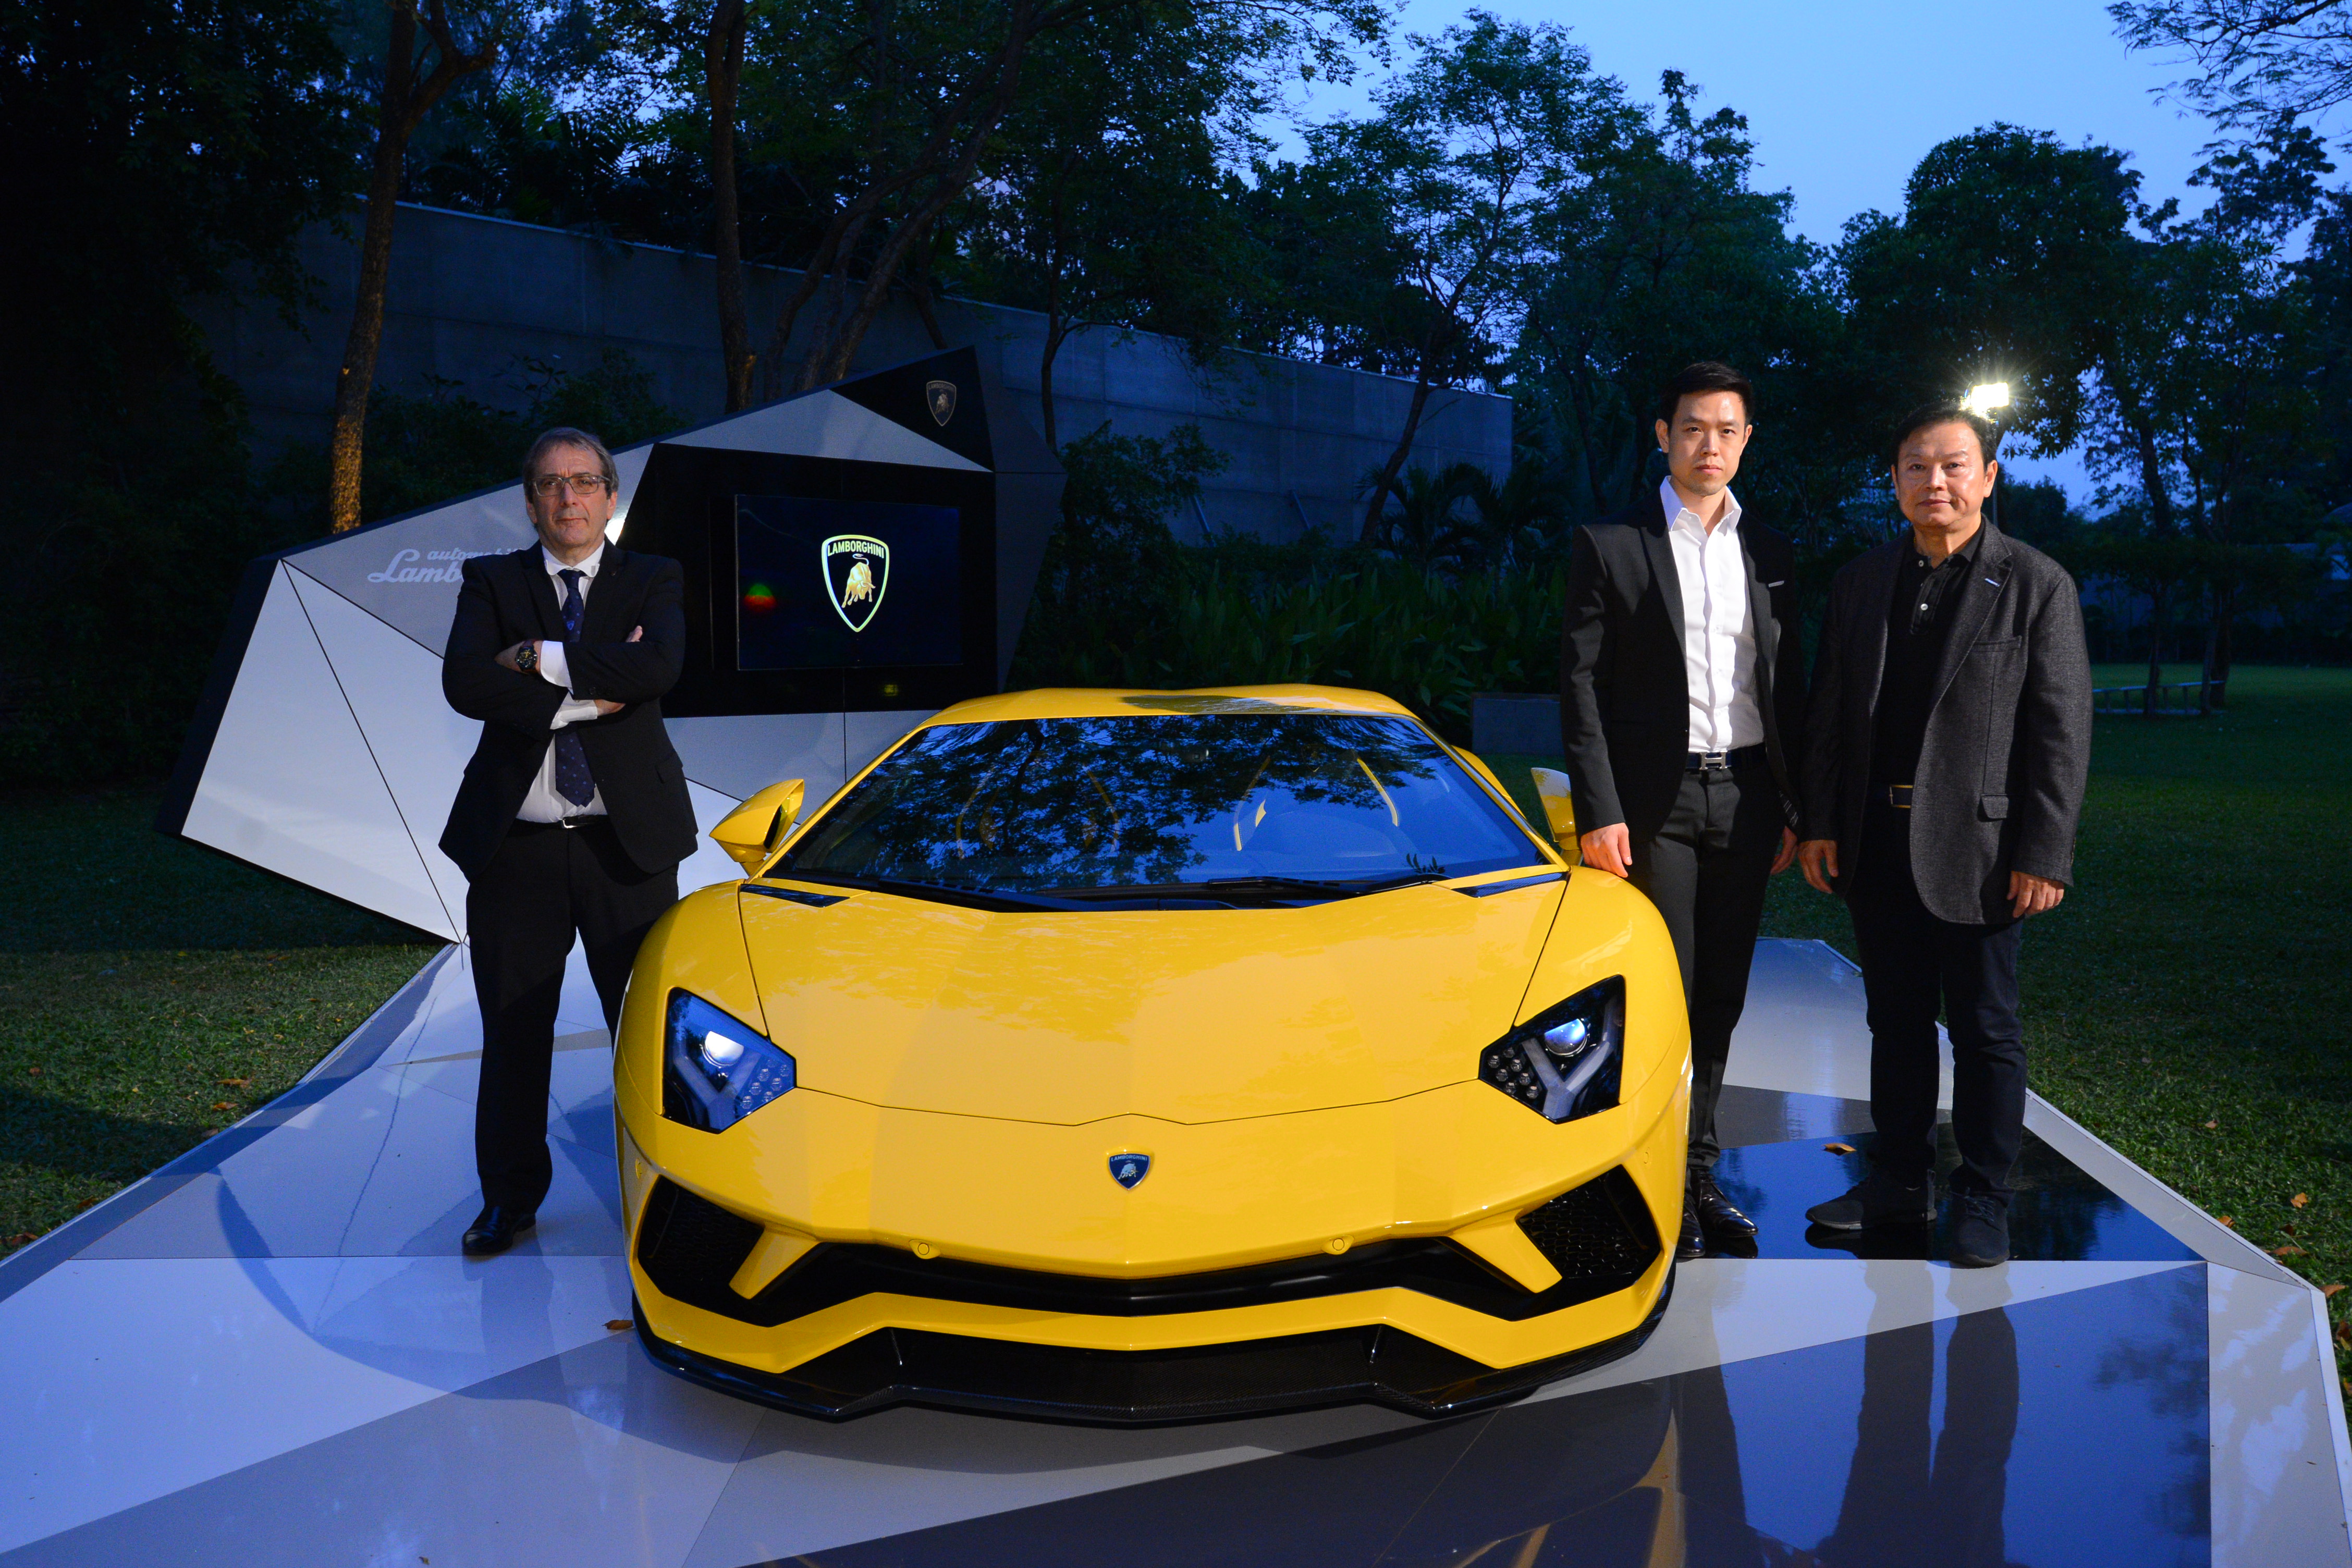 Exclusive Private Preview of The Latest Masterpiece  “Lamborghini Aventador S” For The First Time in Thailand